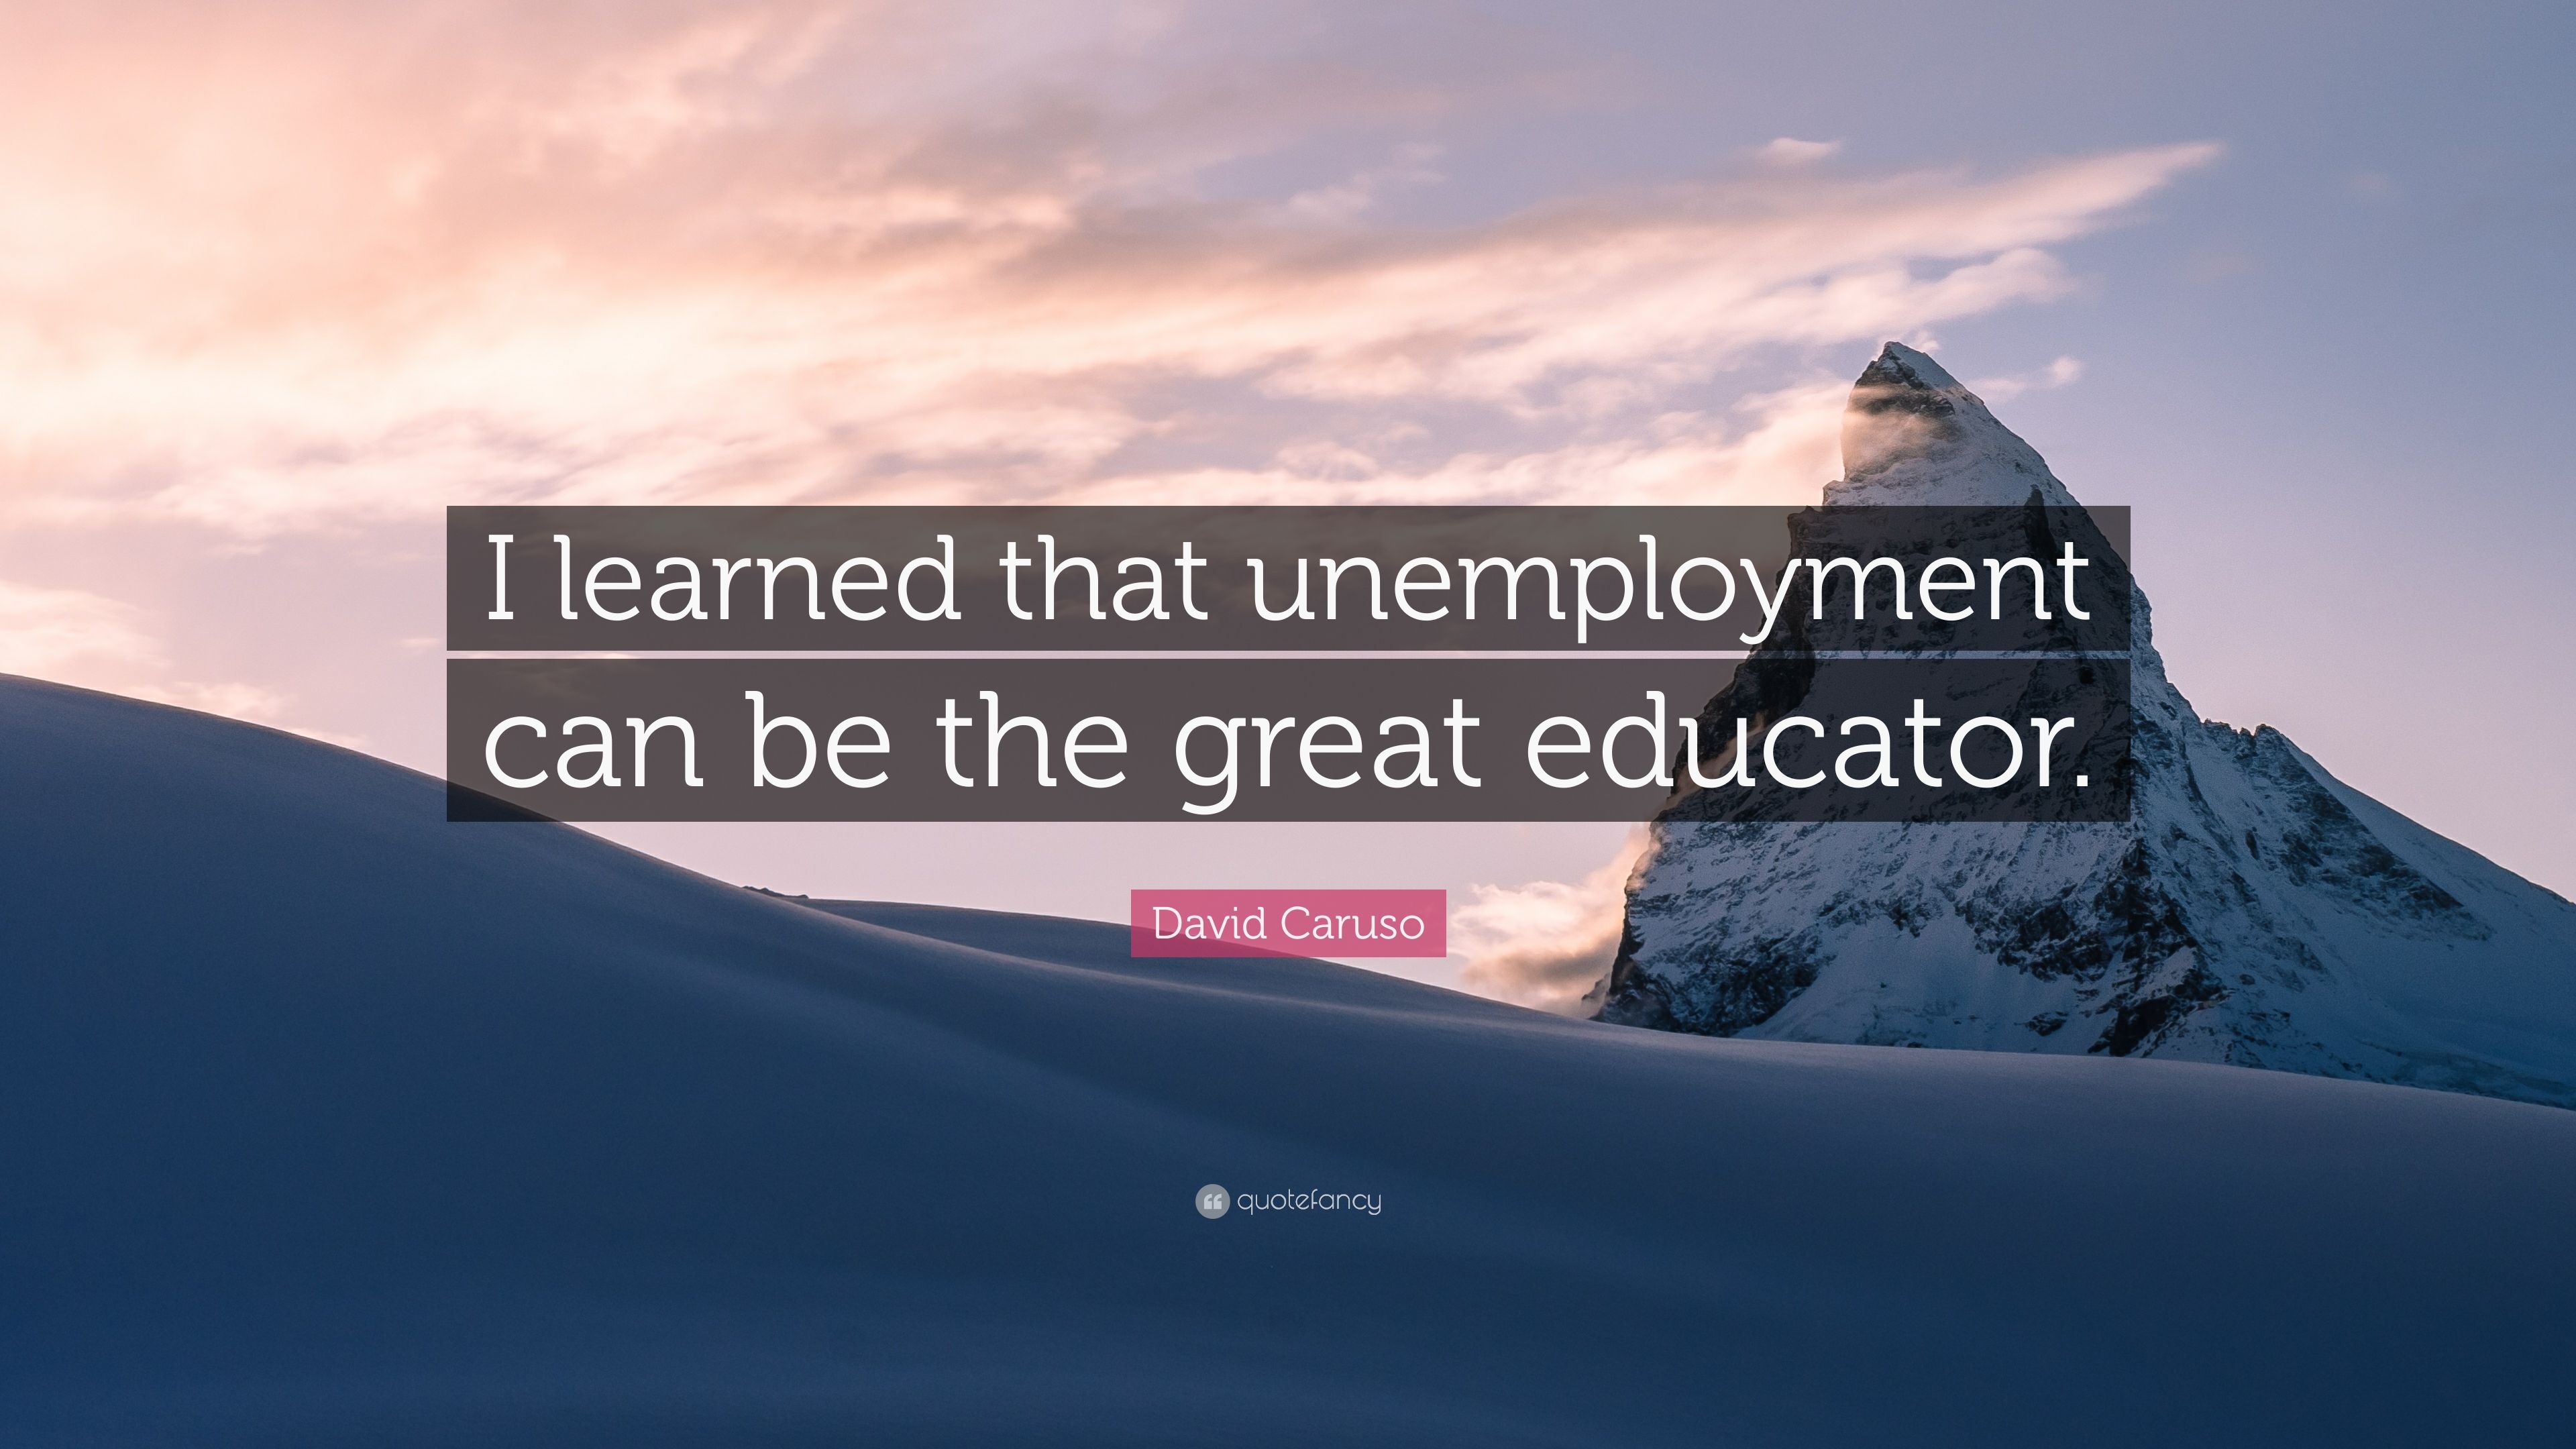 David Caruso Quote: “I learned that unemployment can be the great educator.” (7 wallpaper)